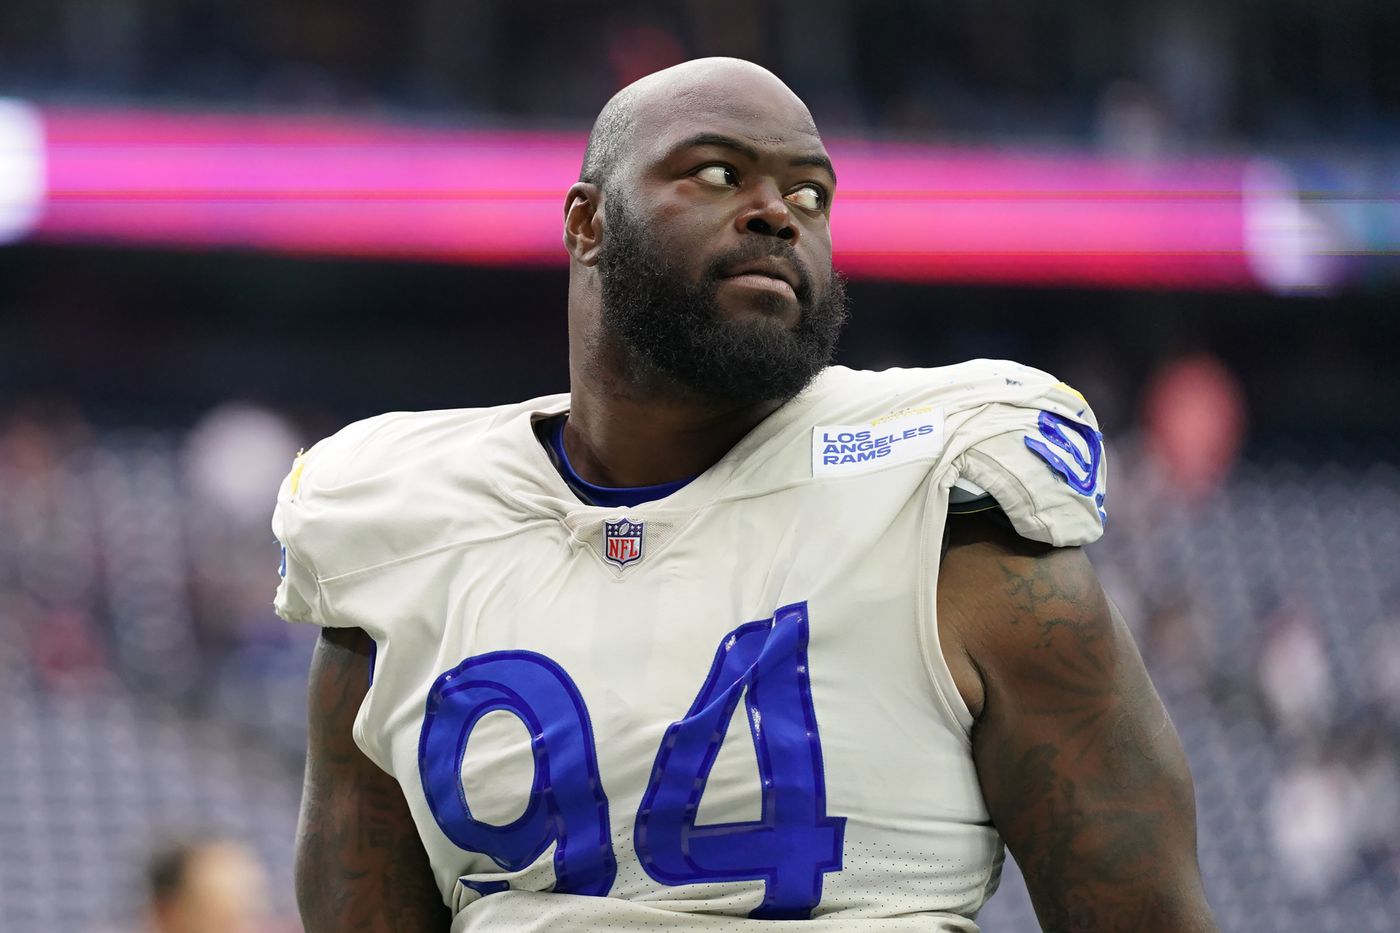 New York Giants are bringing DT A’Shawn Robinson for a visit, per report